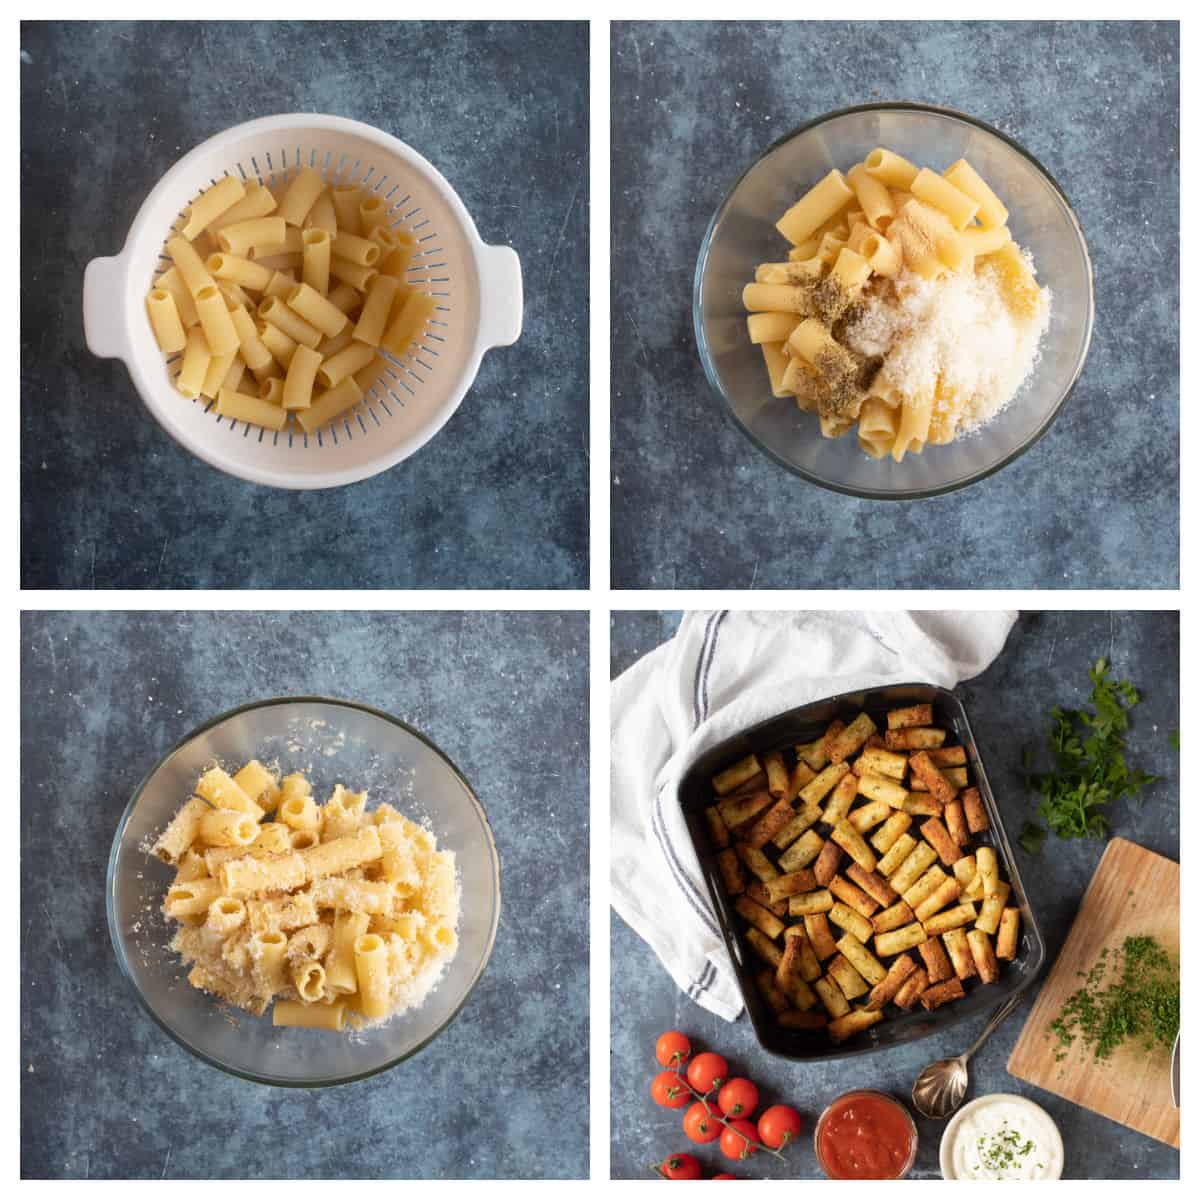 Step by step photo instructions for making air fryer pasta chips.